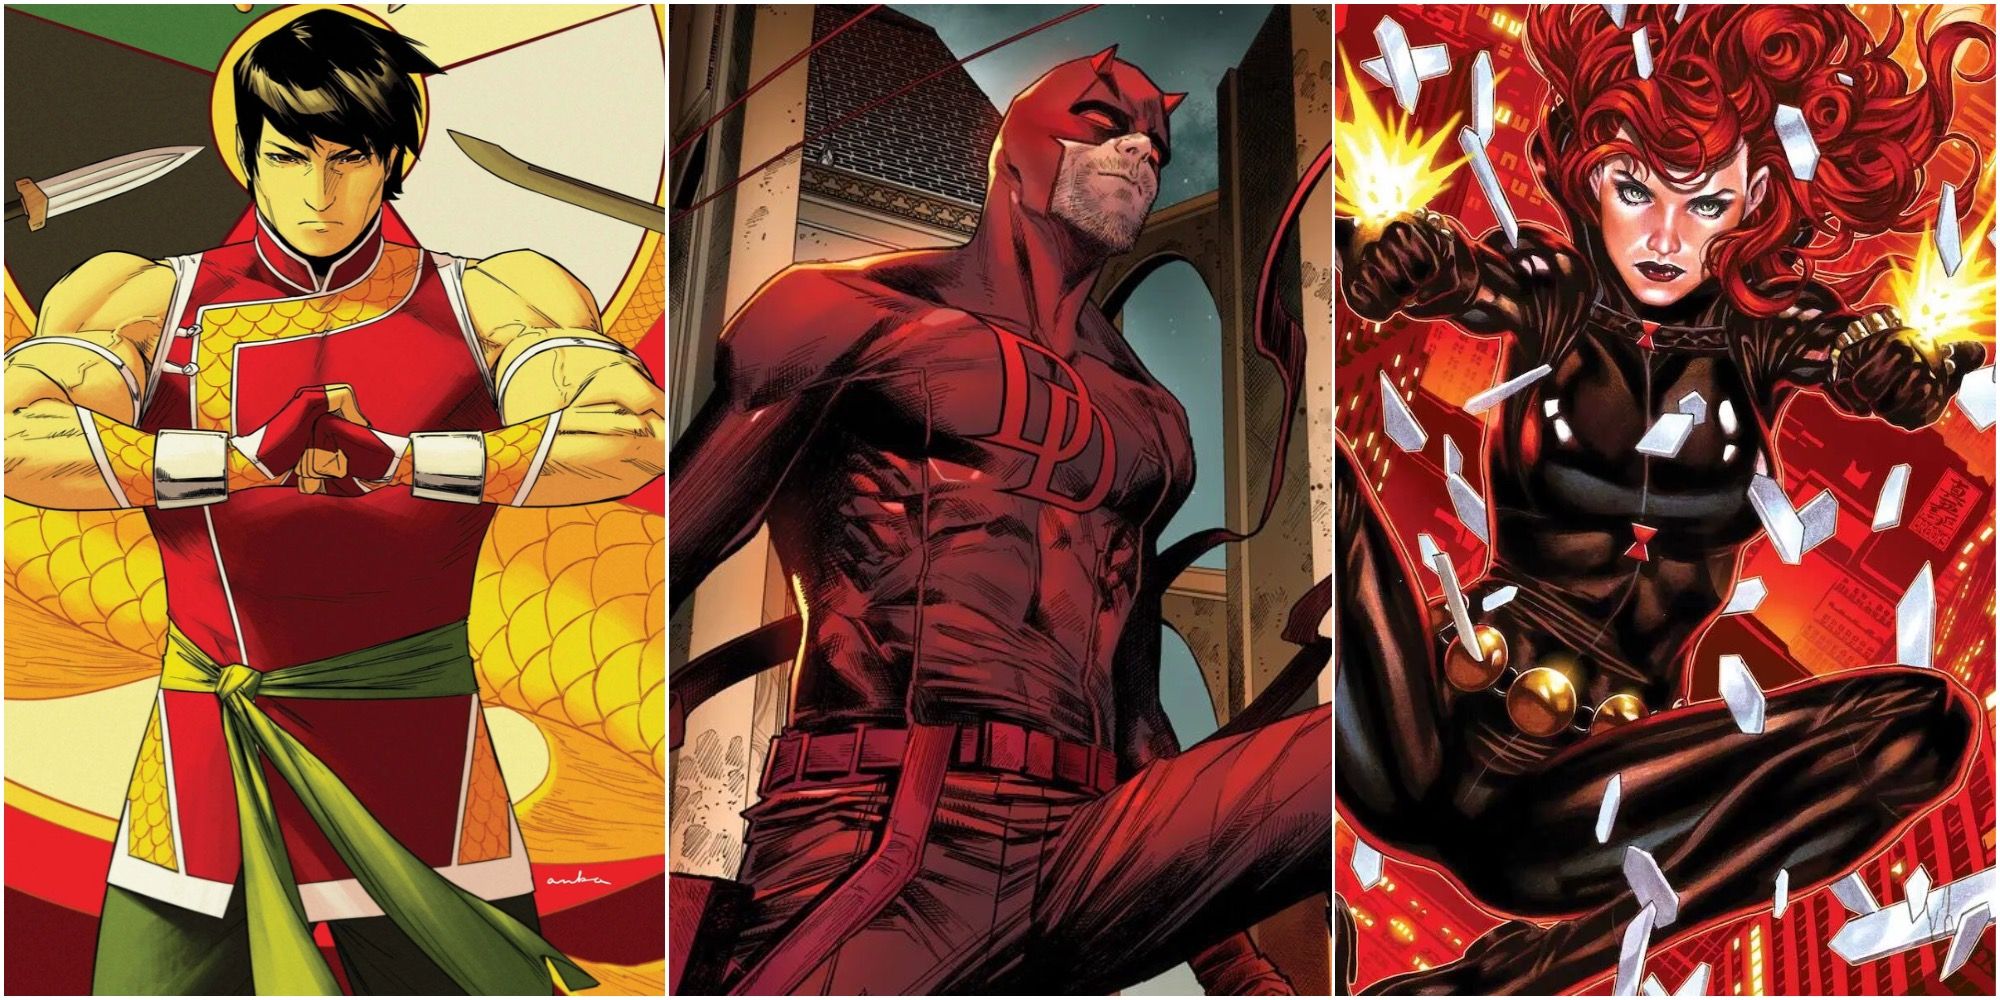 Daredevil, Black Widow, and Shang-Chi